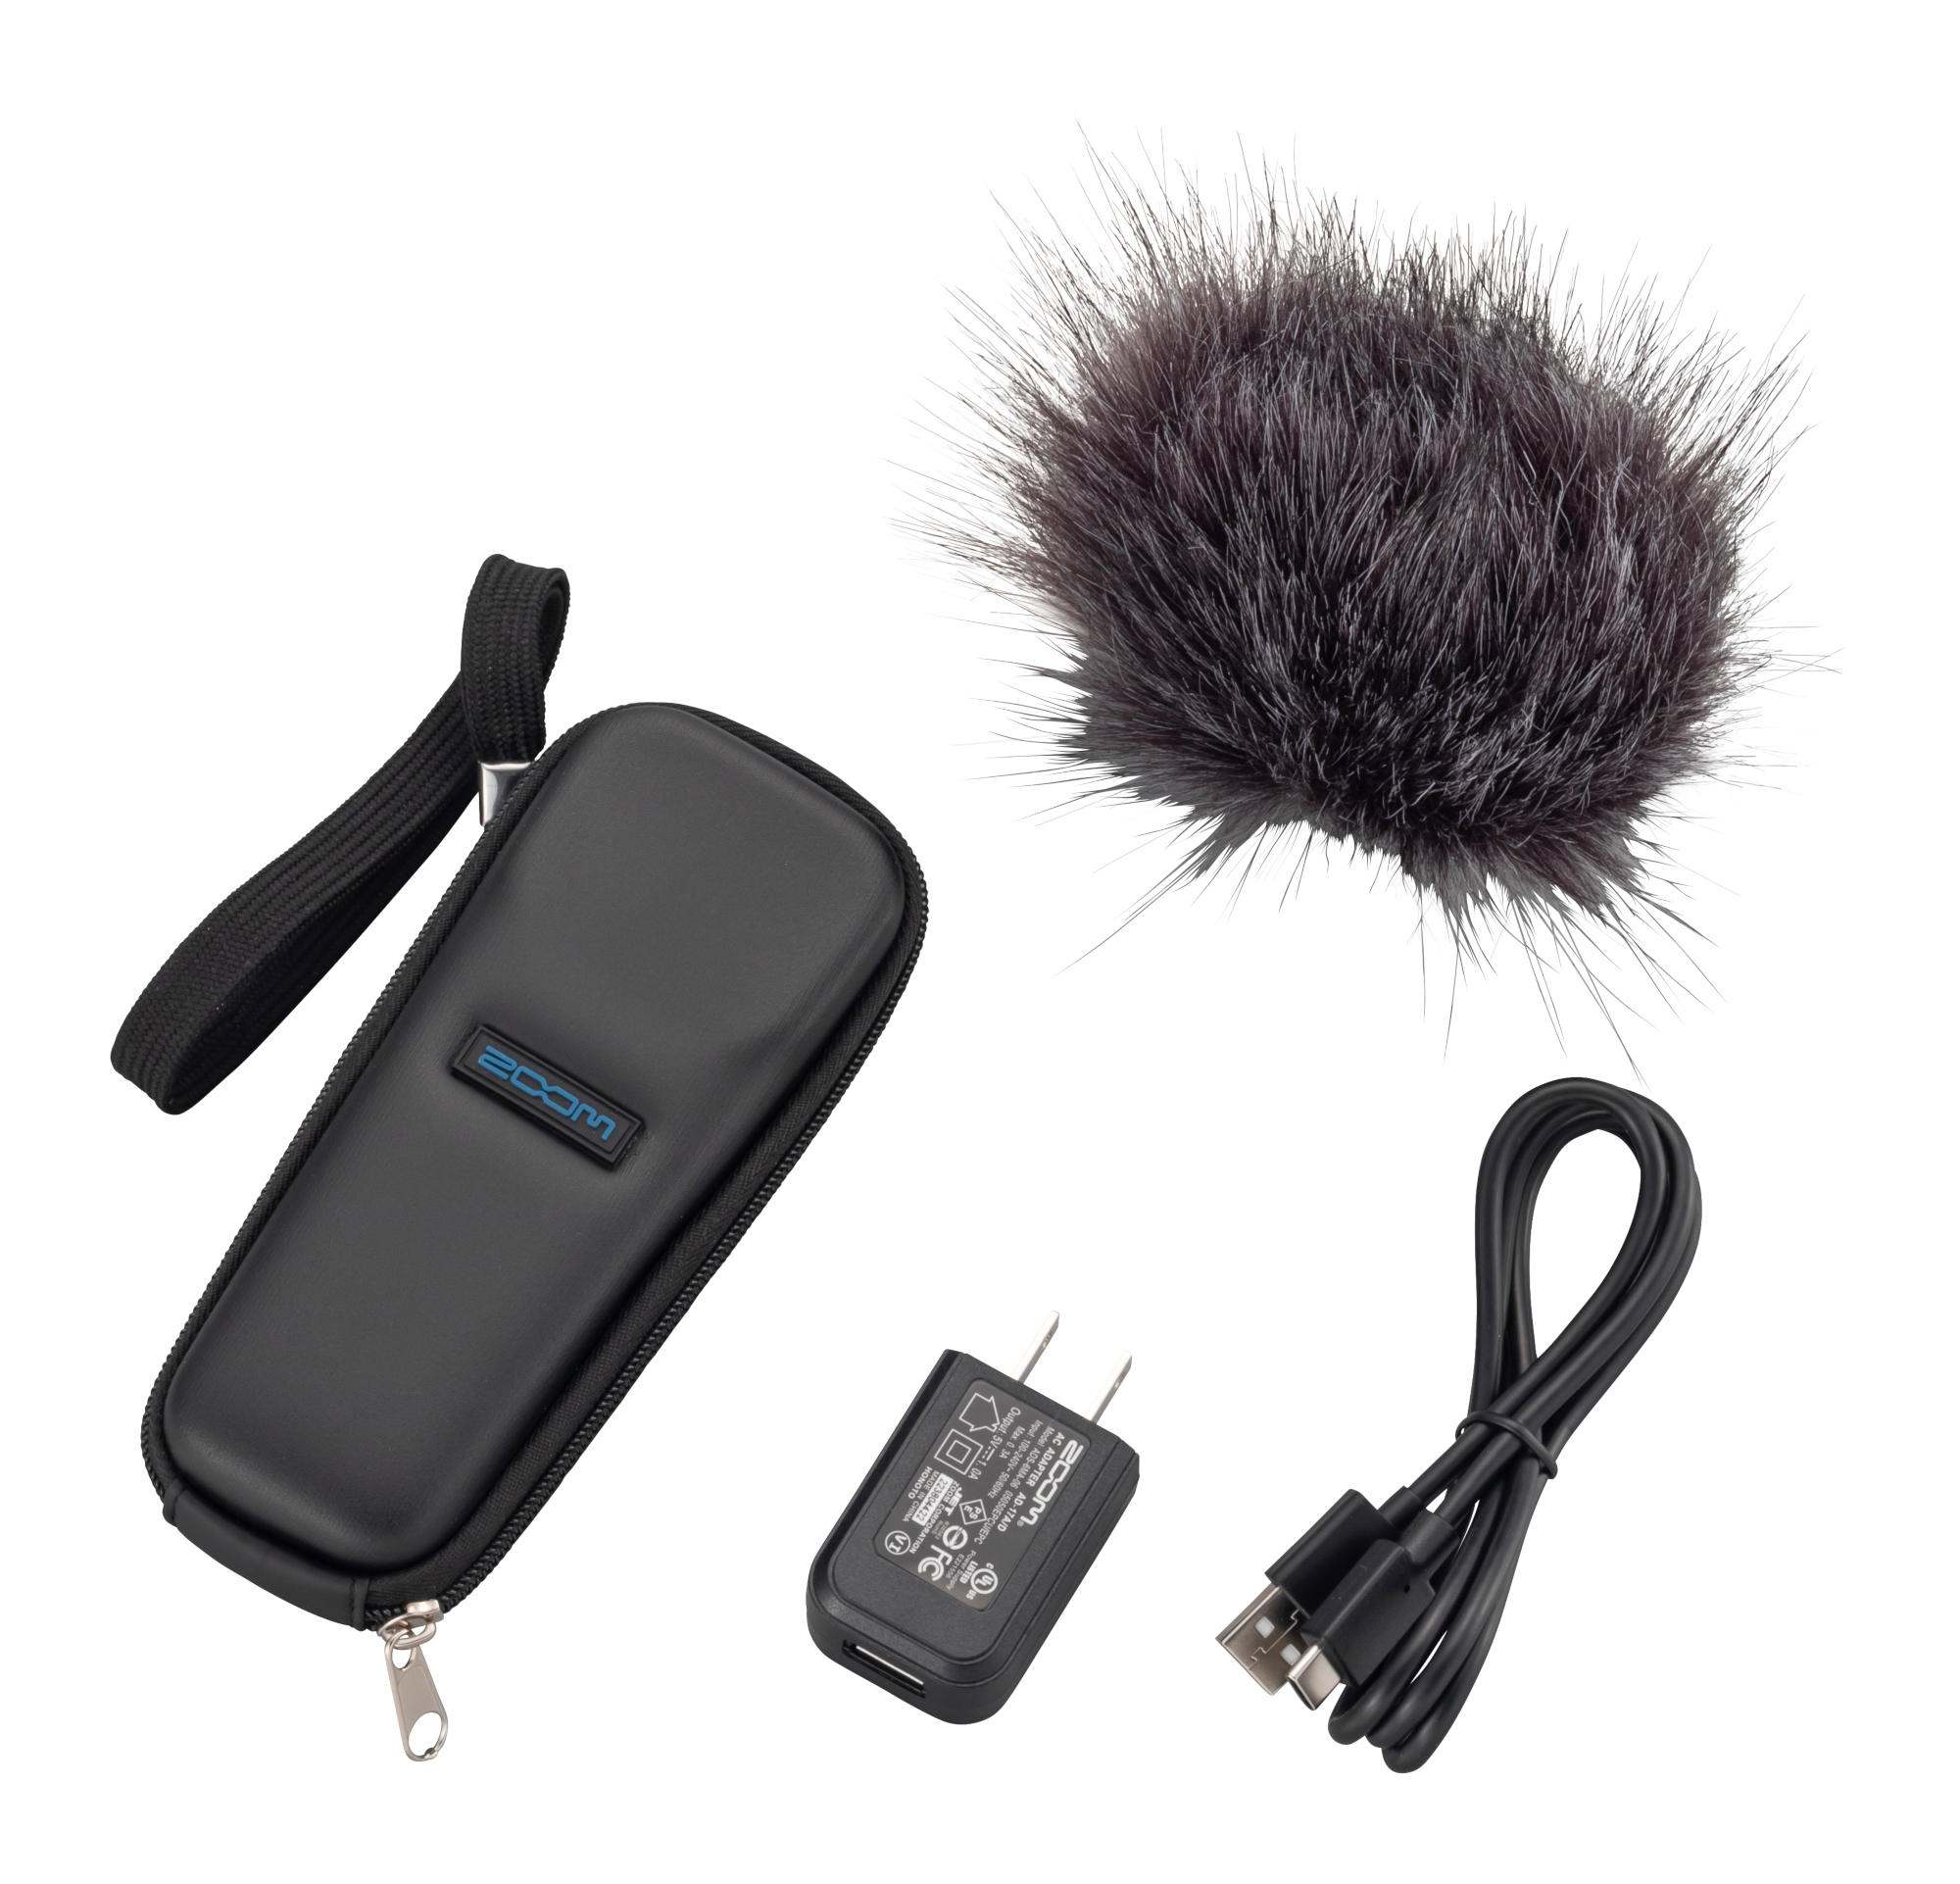 Zoom Aph-1e - Accessories set for recorder - Variation 1